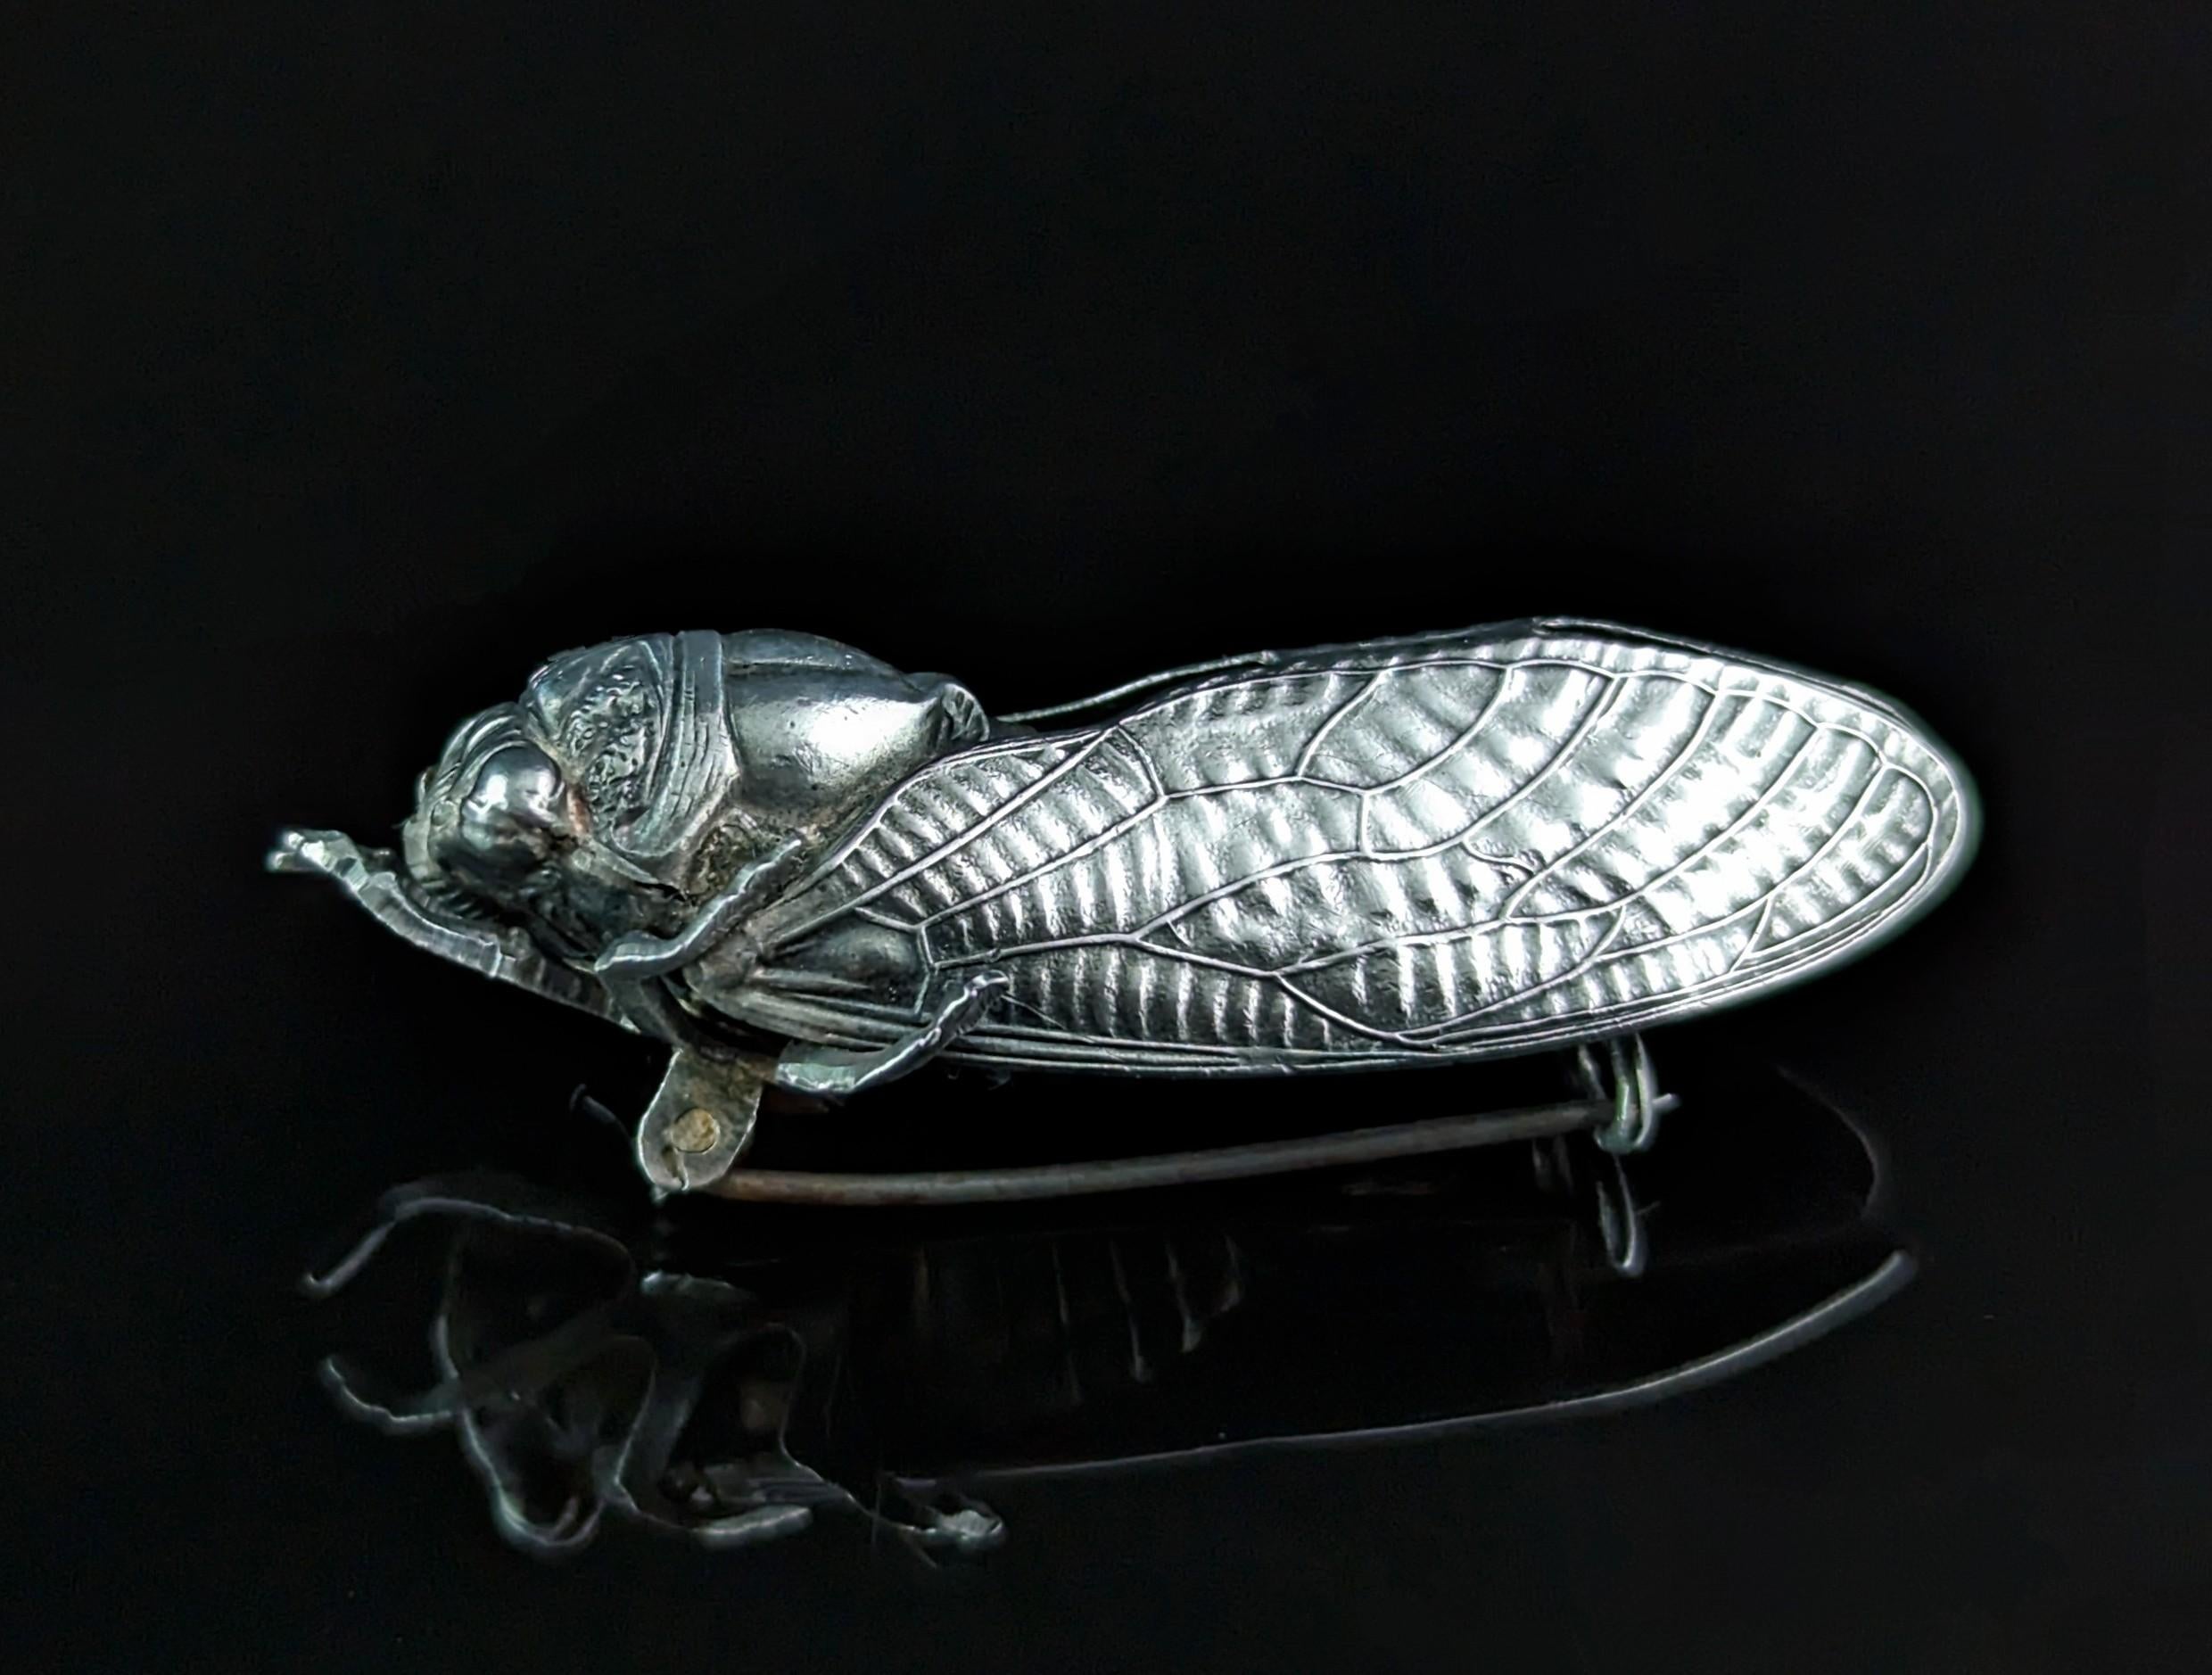 A very well detailed and substantial antique French silver cicada brooch.

There is so much fine detailing on this piece and with that and the accuracy in size it has a very lifelike feel to it.

The Cicada has a long history in jewellery with